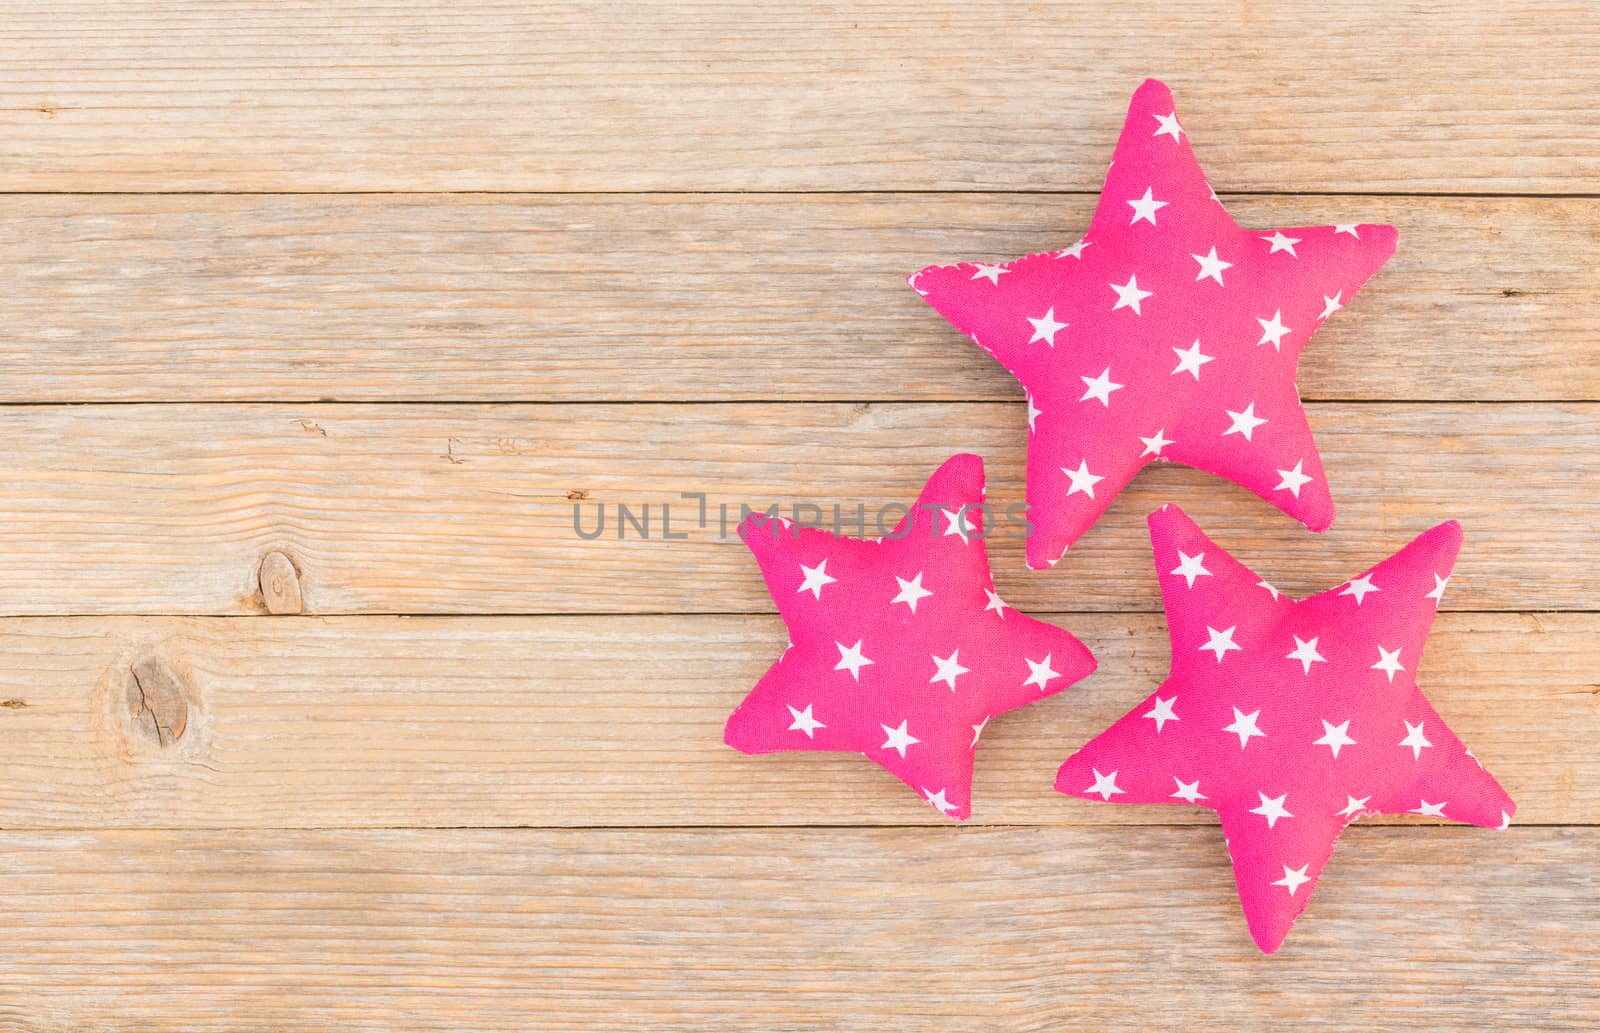 Three fabric stars on wood background with copy space